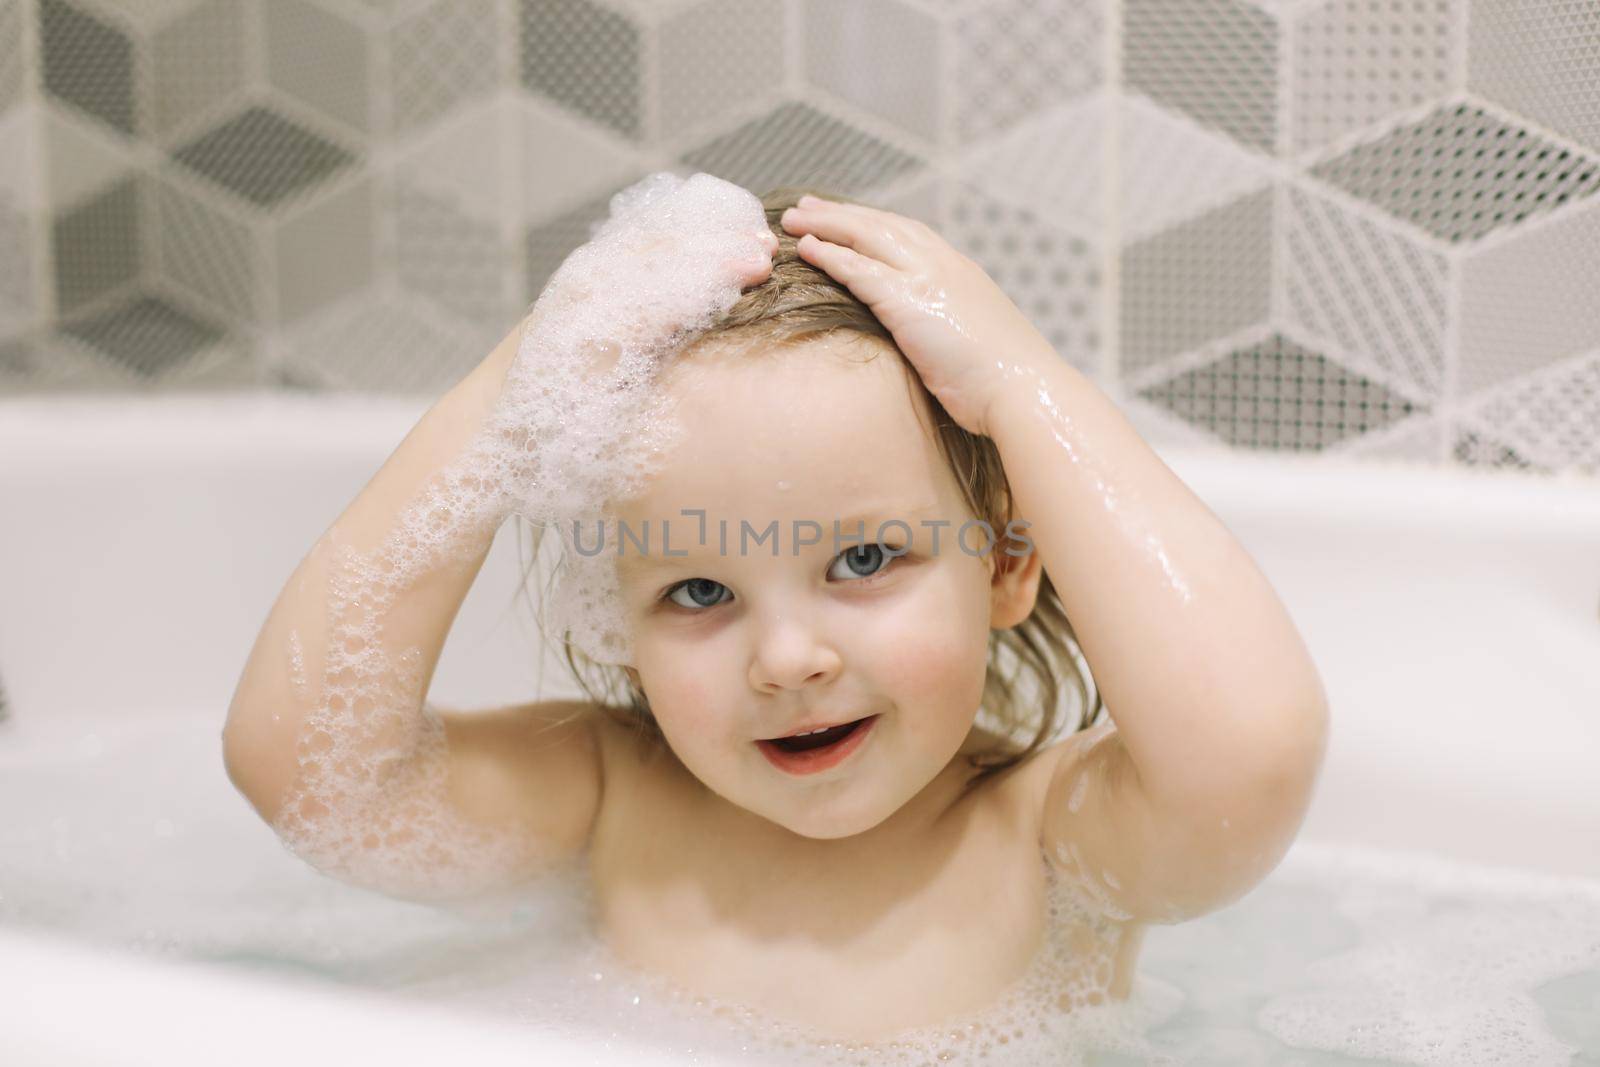 Child bathing. Little baby taking bath, closeup face portrait of smiling girl, health care and kids hygiene. 